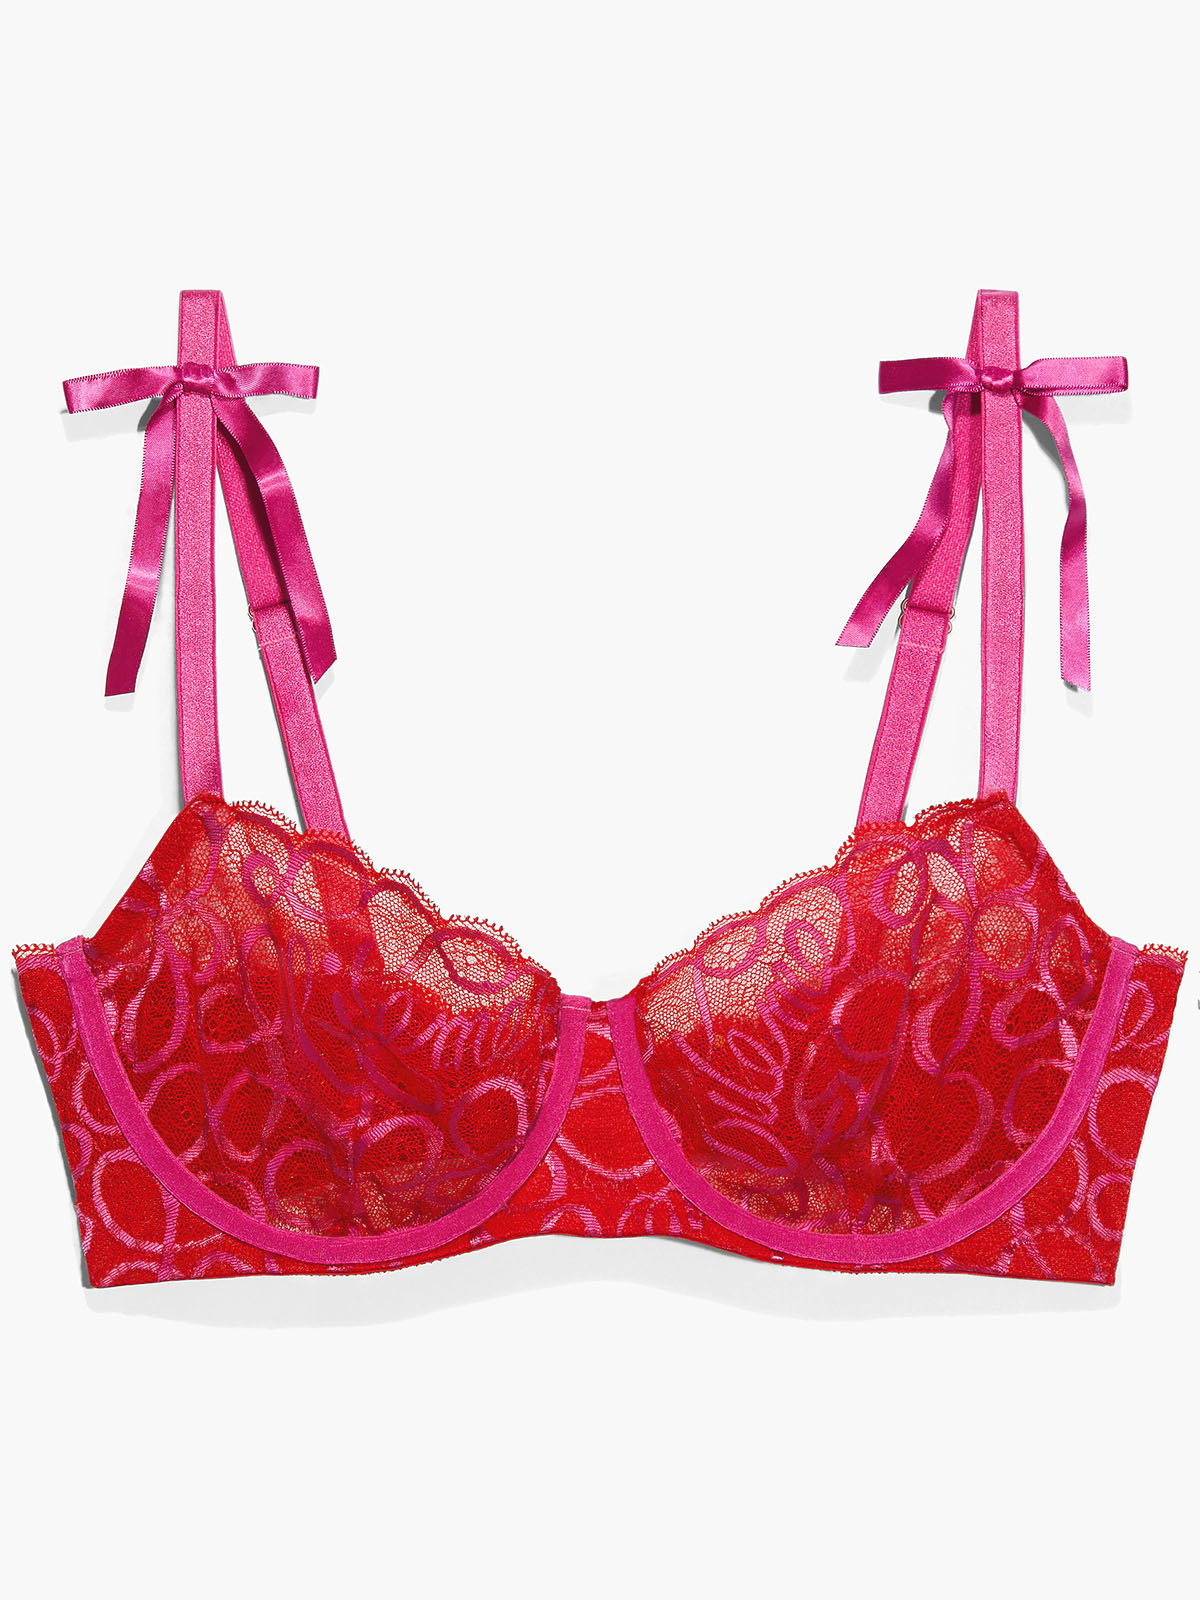 Red with Gold Lace underwire push-up Bra- Satin bow - Size 70A